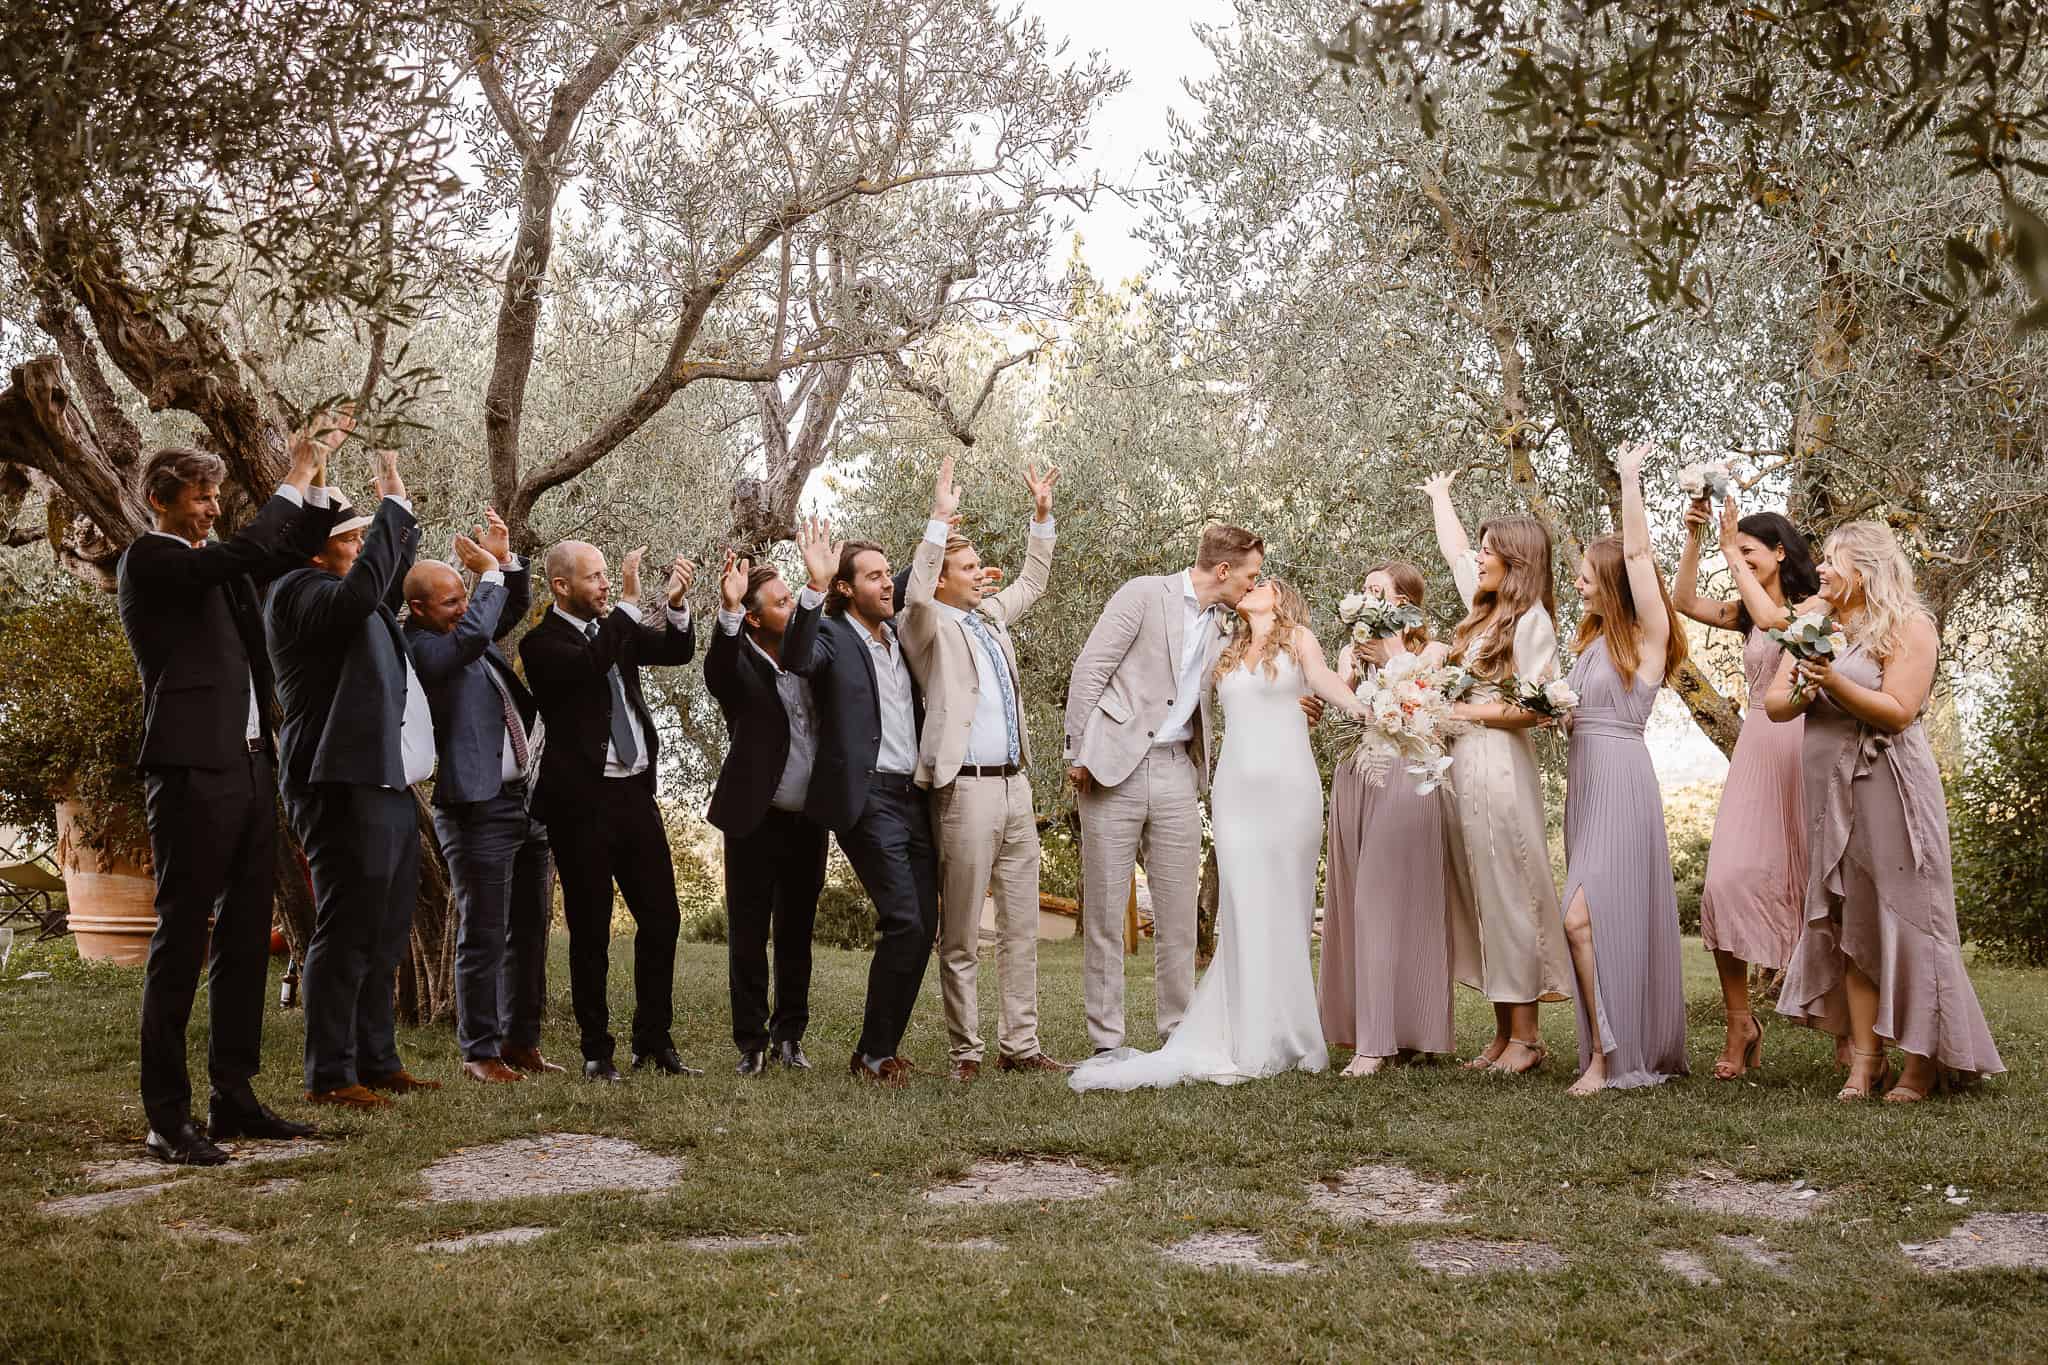 Bridal party cheering on the bride and groom at a beautiful Tuscany destination wedding